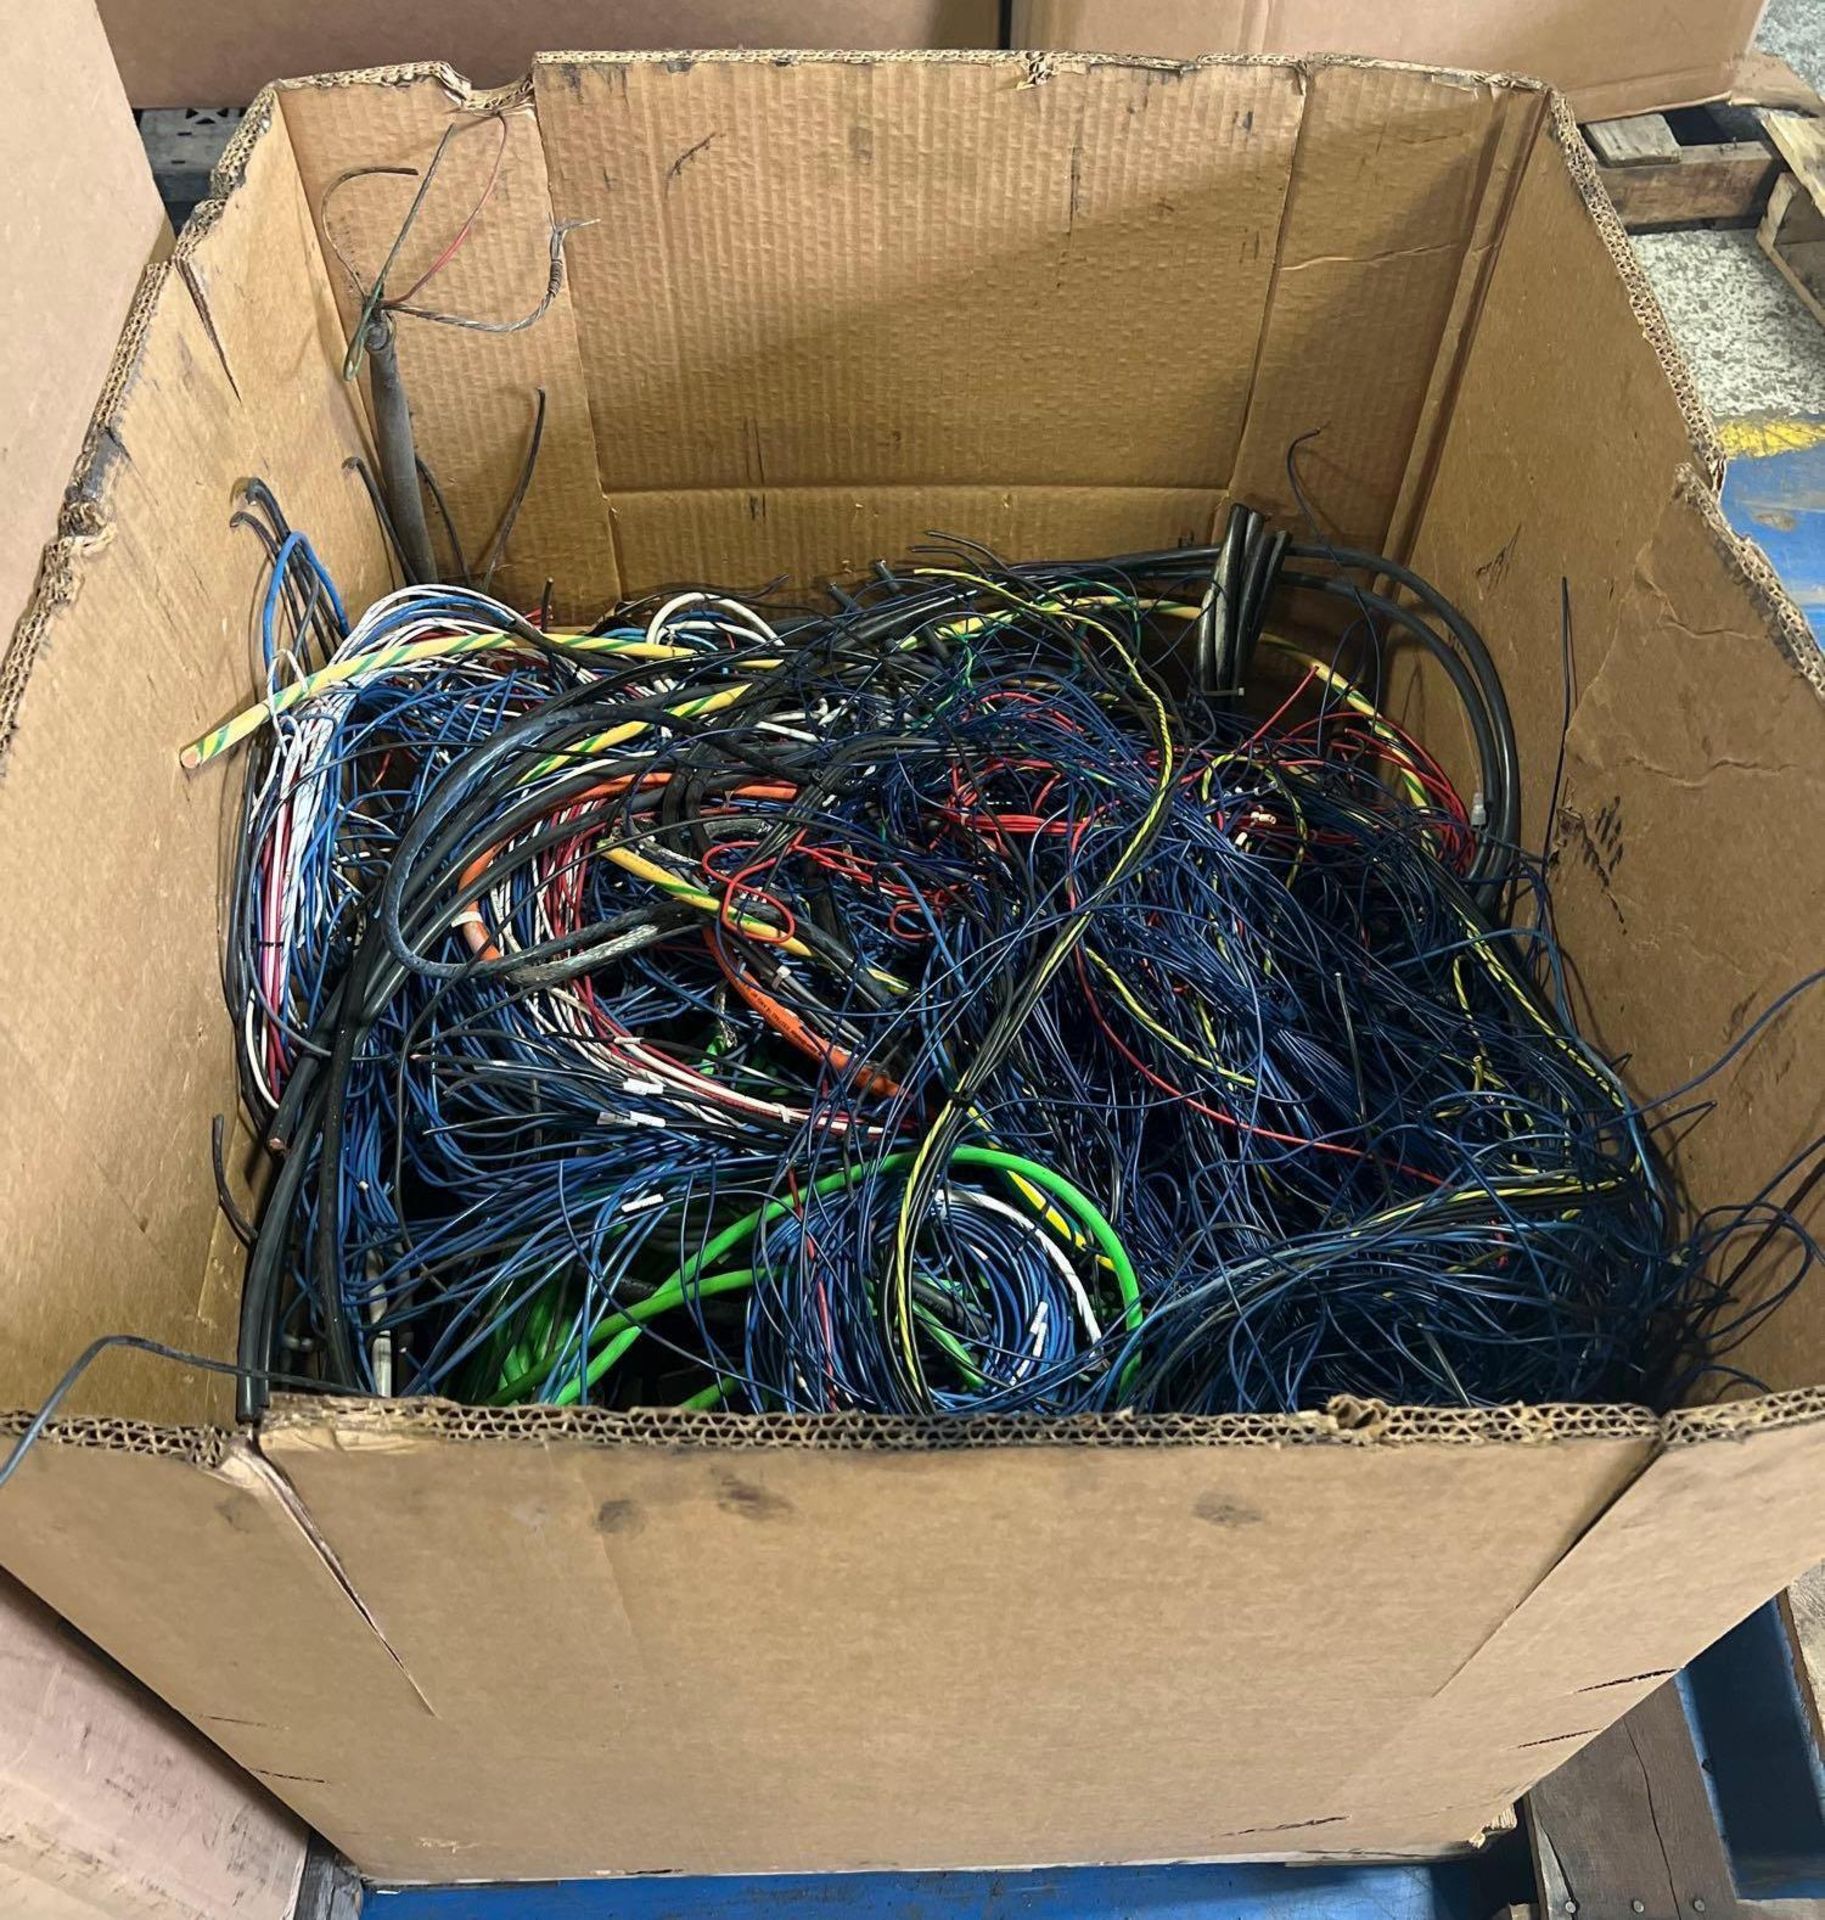 Scrap Wire (Insulated) 370 Lbs. (Includes Tare Weight)